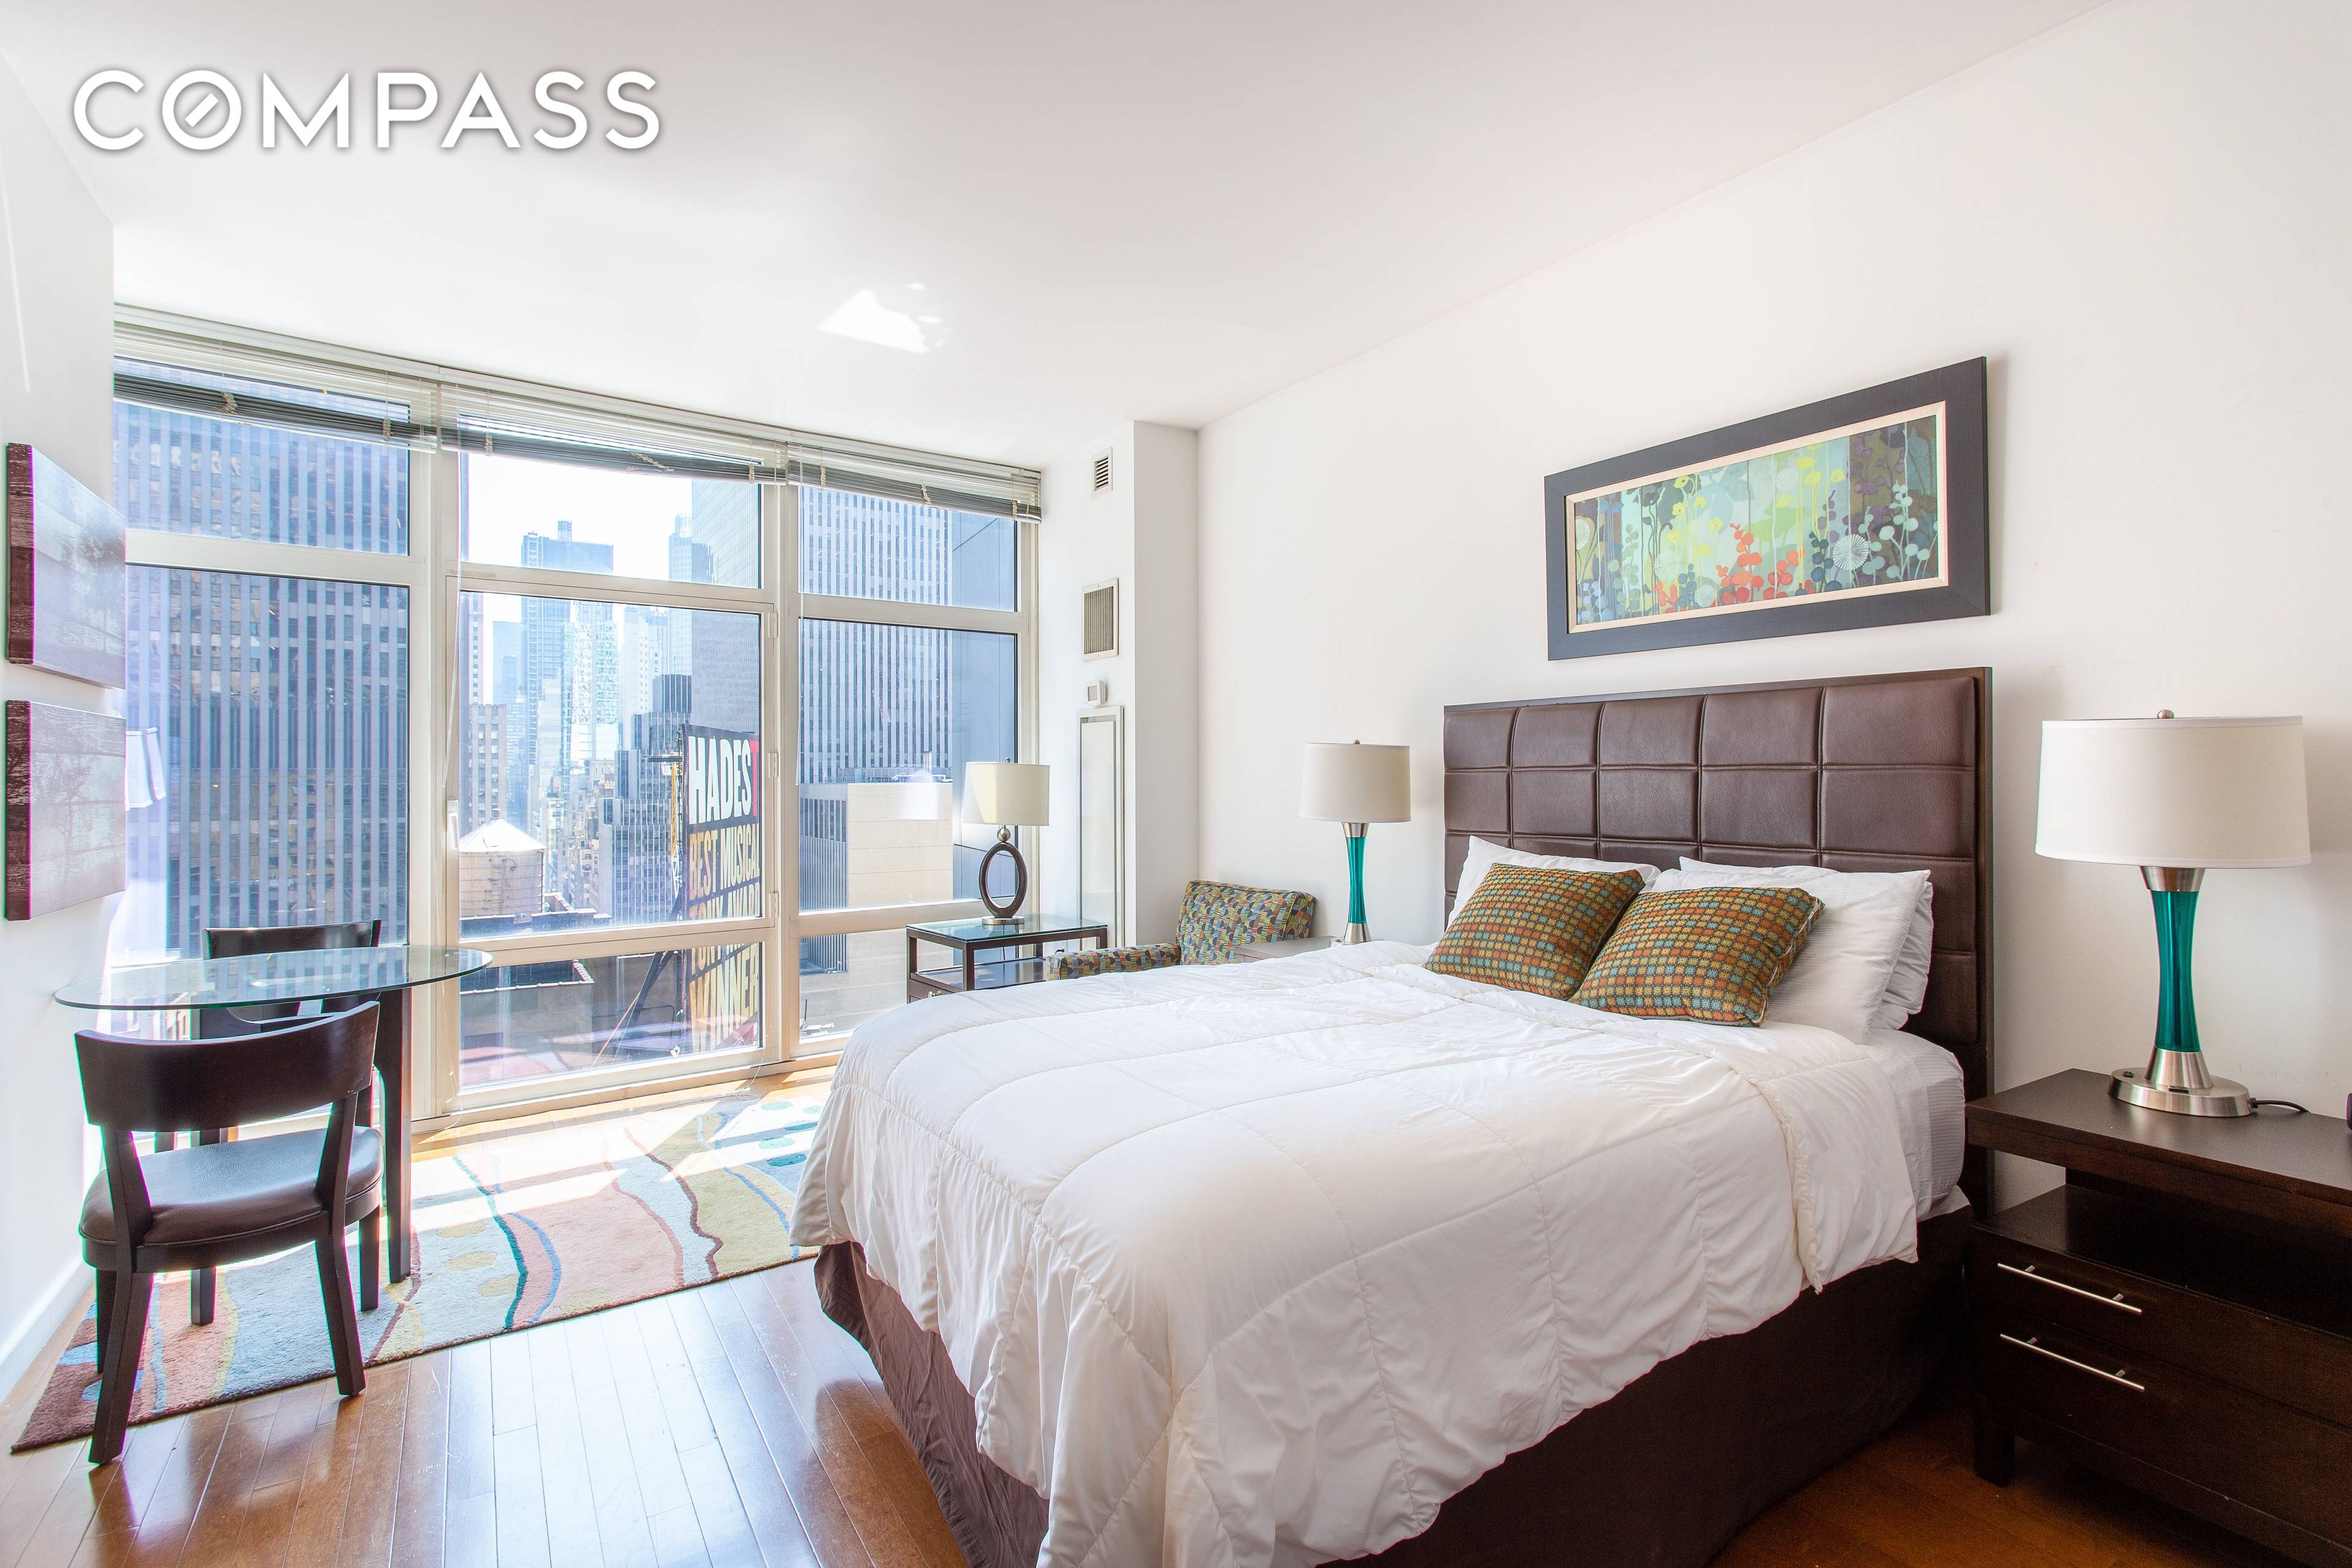 600 Sq. Ft. Studio Located In The Heart Of Times Square.